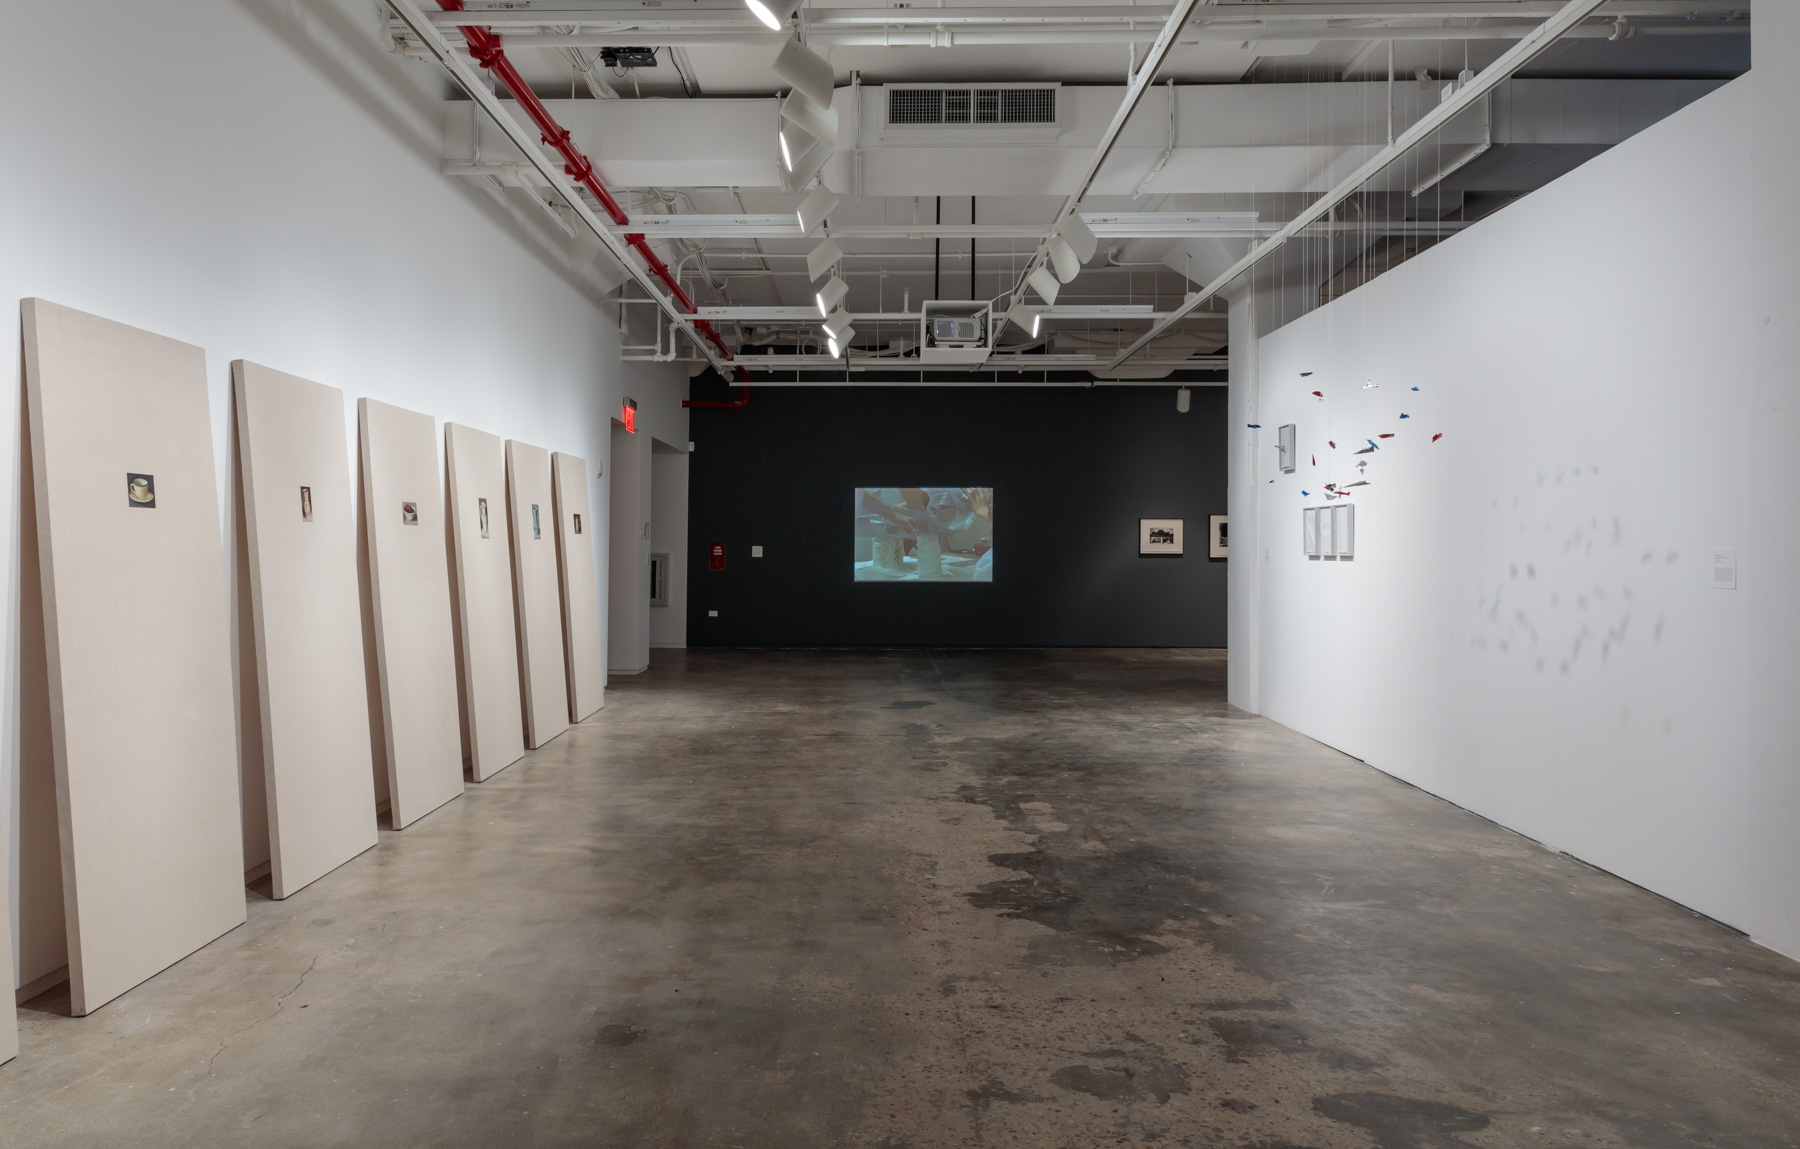  Installation View:&nbsp; Copy, Translate, Repeat: Contemporary Art from the Colección Patricia Phelps de Cisneros , Hunter College Art Galleries, 2018. Photo by Stan Narten.&nbsp; 